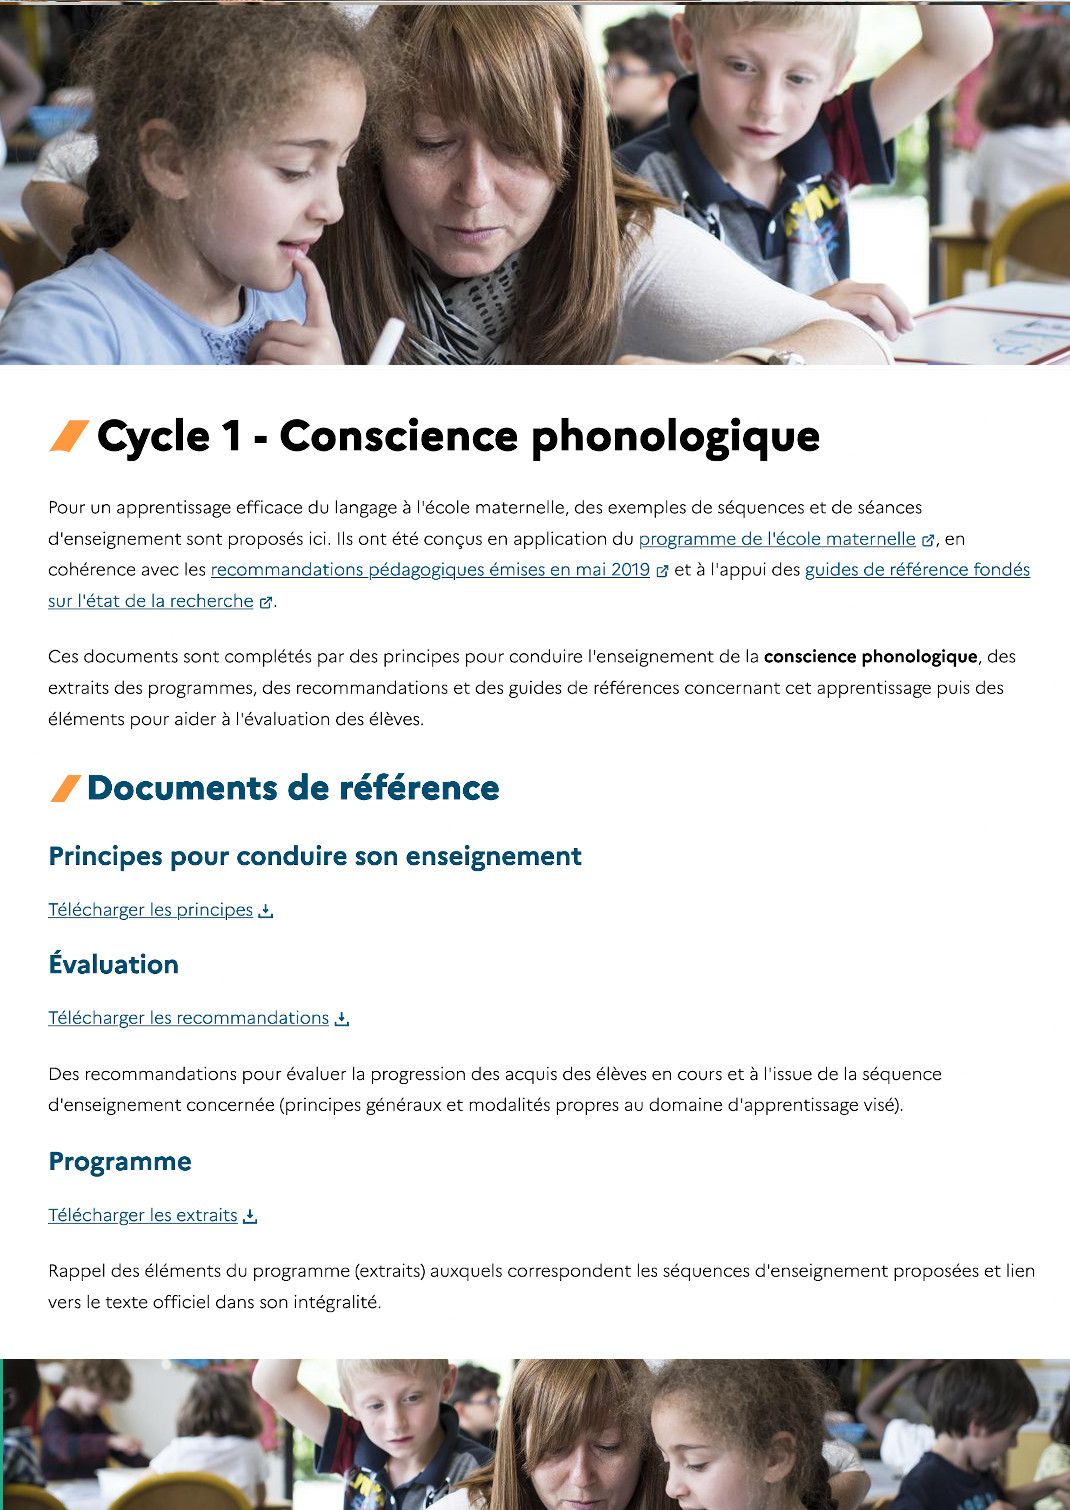 Cycle 1 - Conscience phonologique